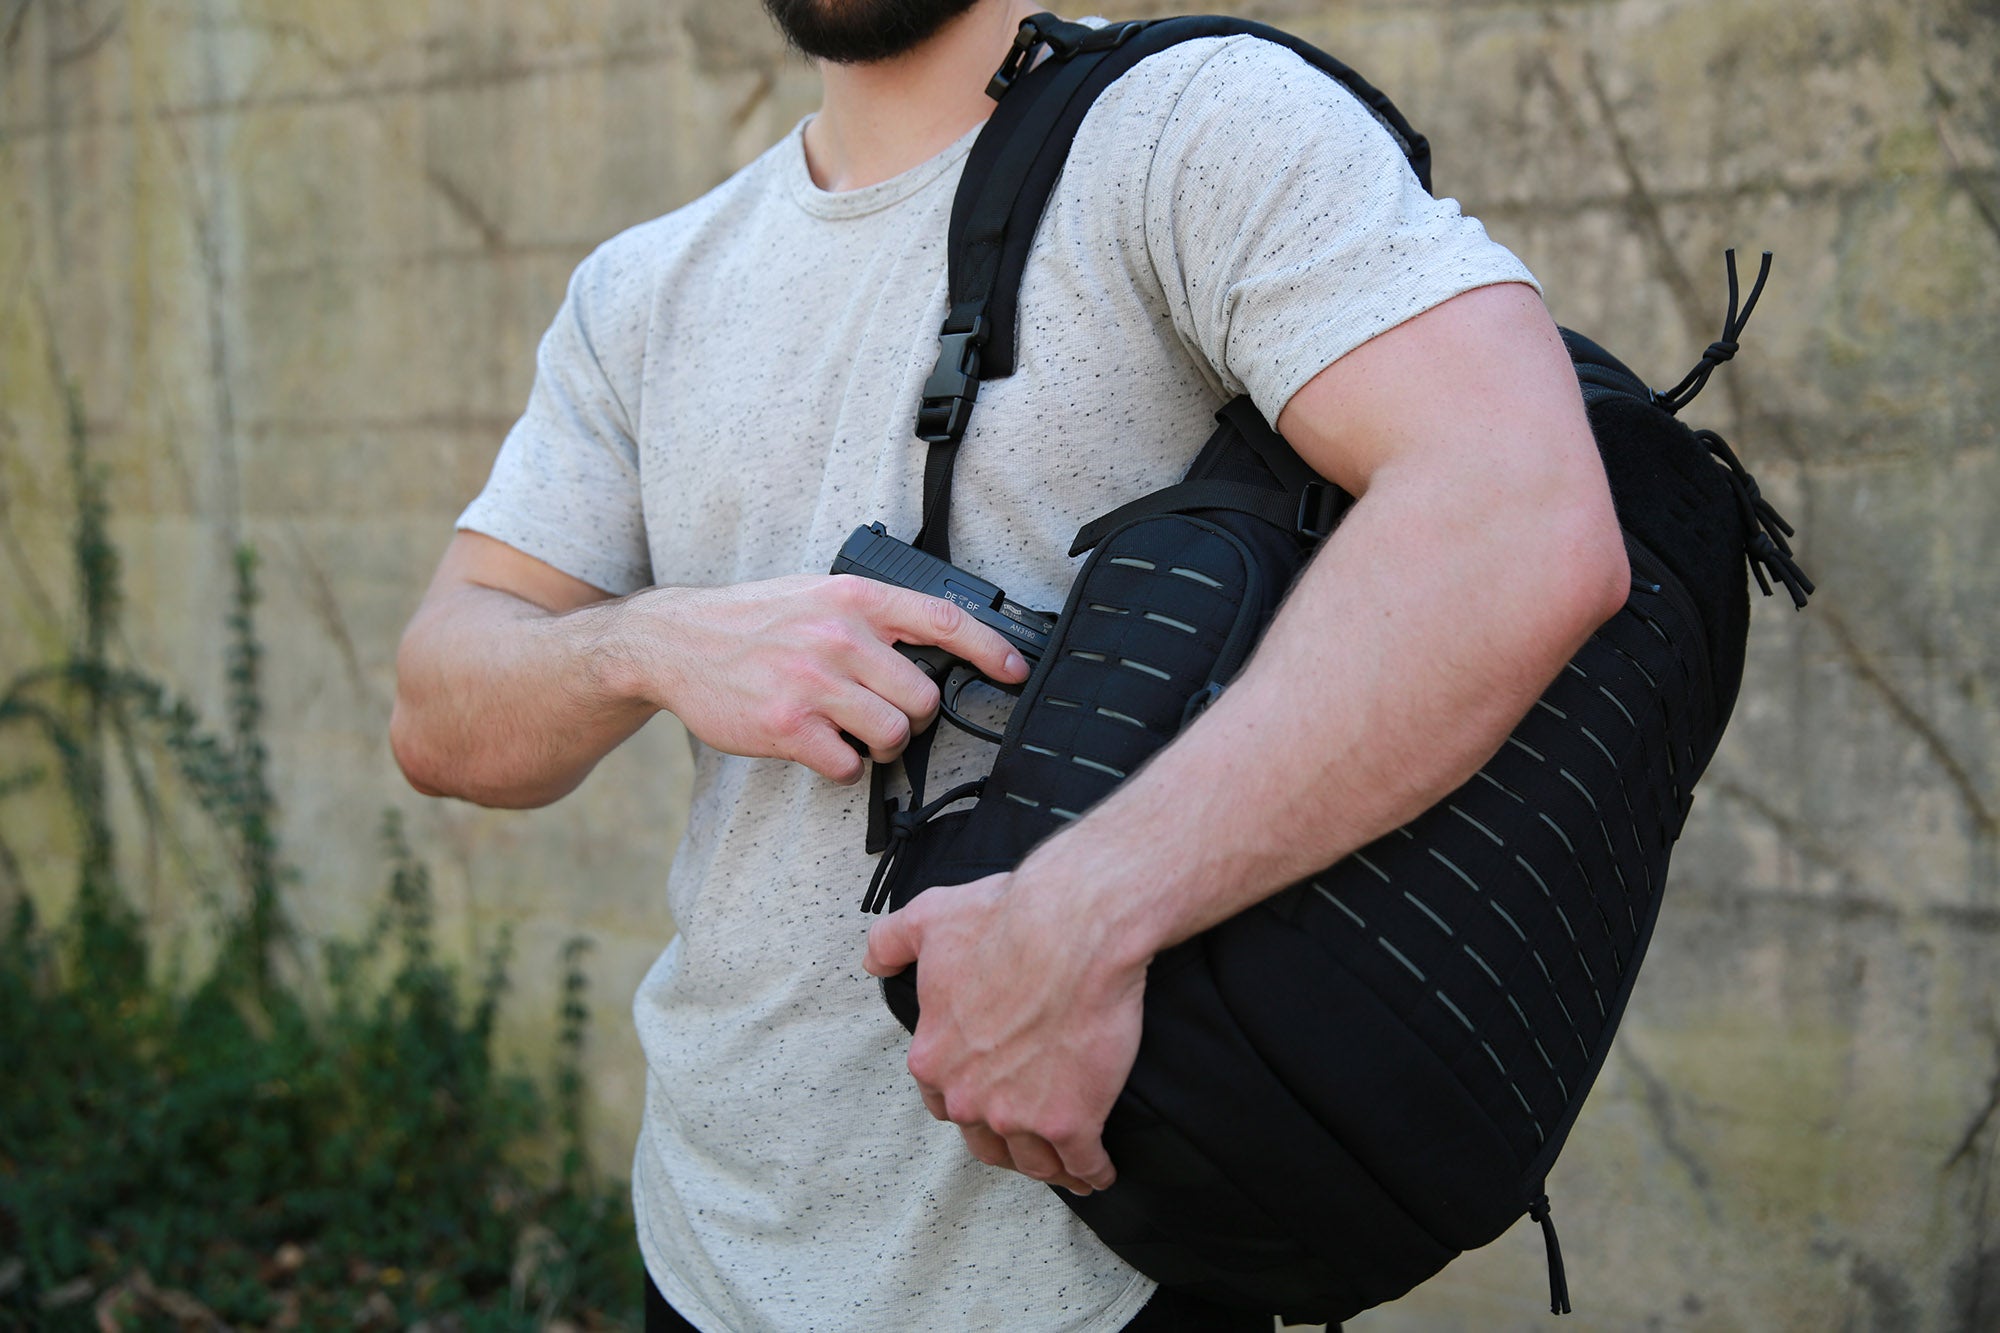 10 Best Tactical Fanny Packs for Any Mission Reviewed in 2023